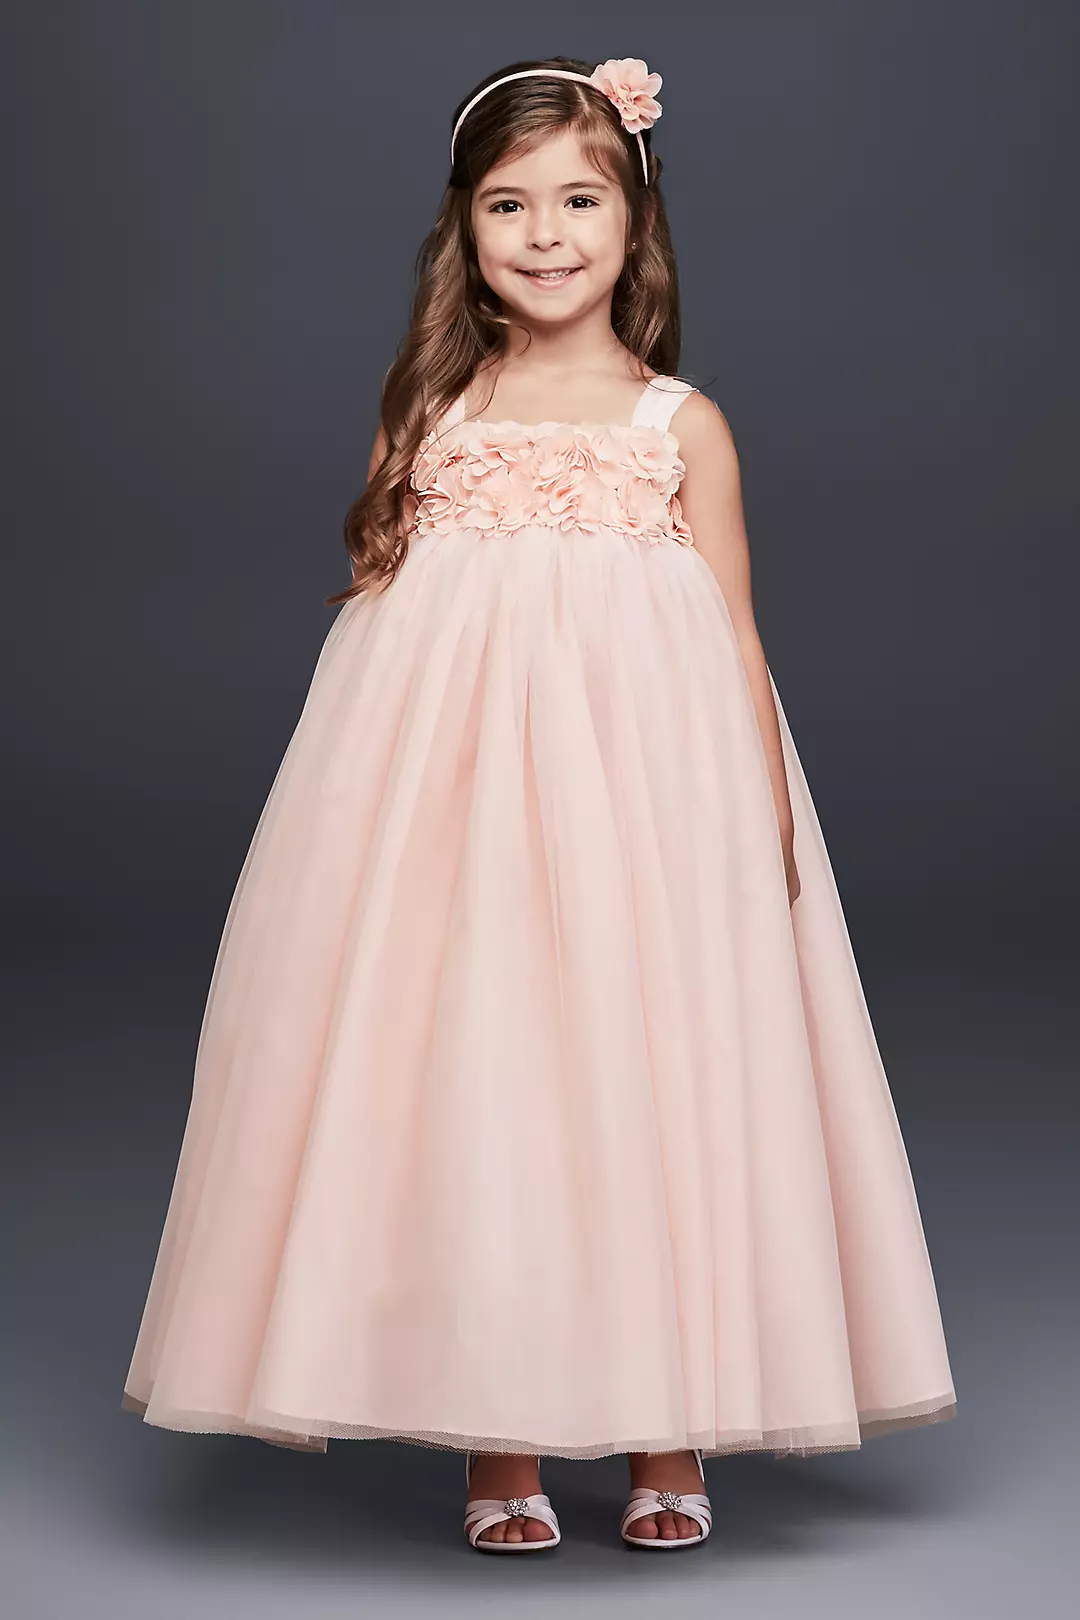 Tulle Flower Girl Dress with 3D Floral Bodice Image